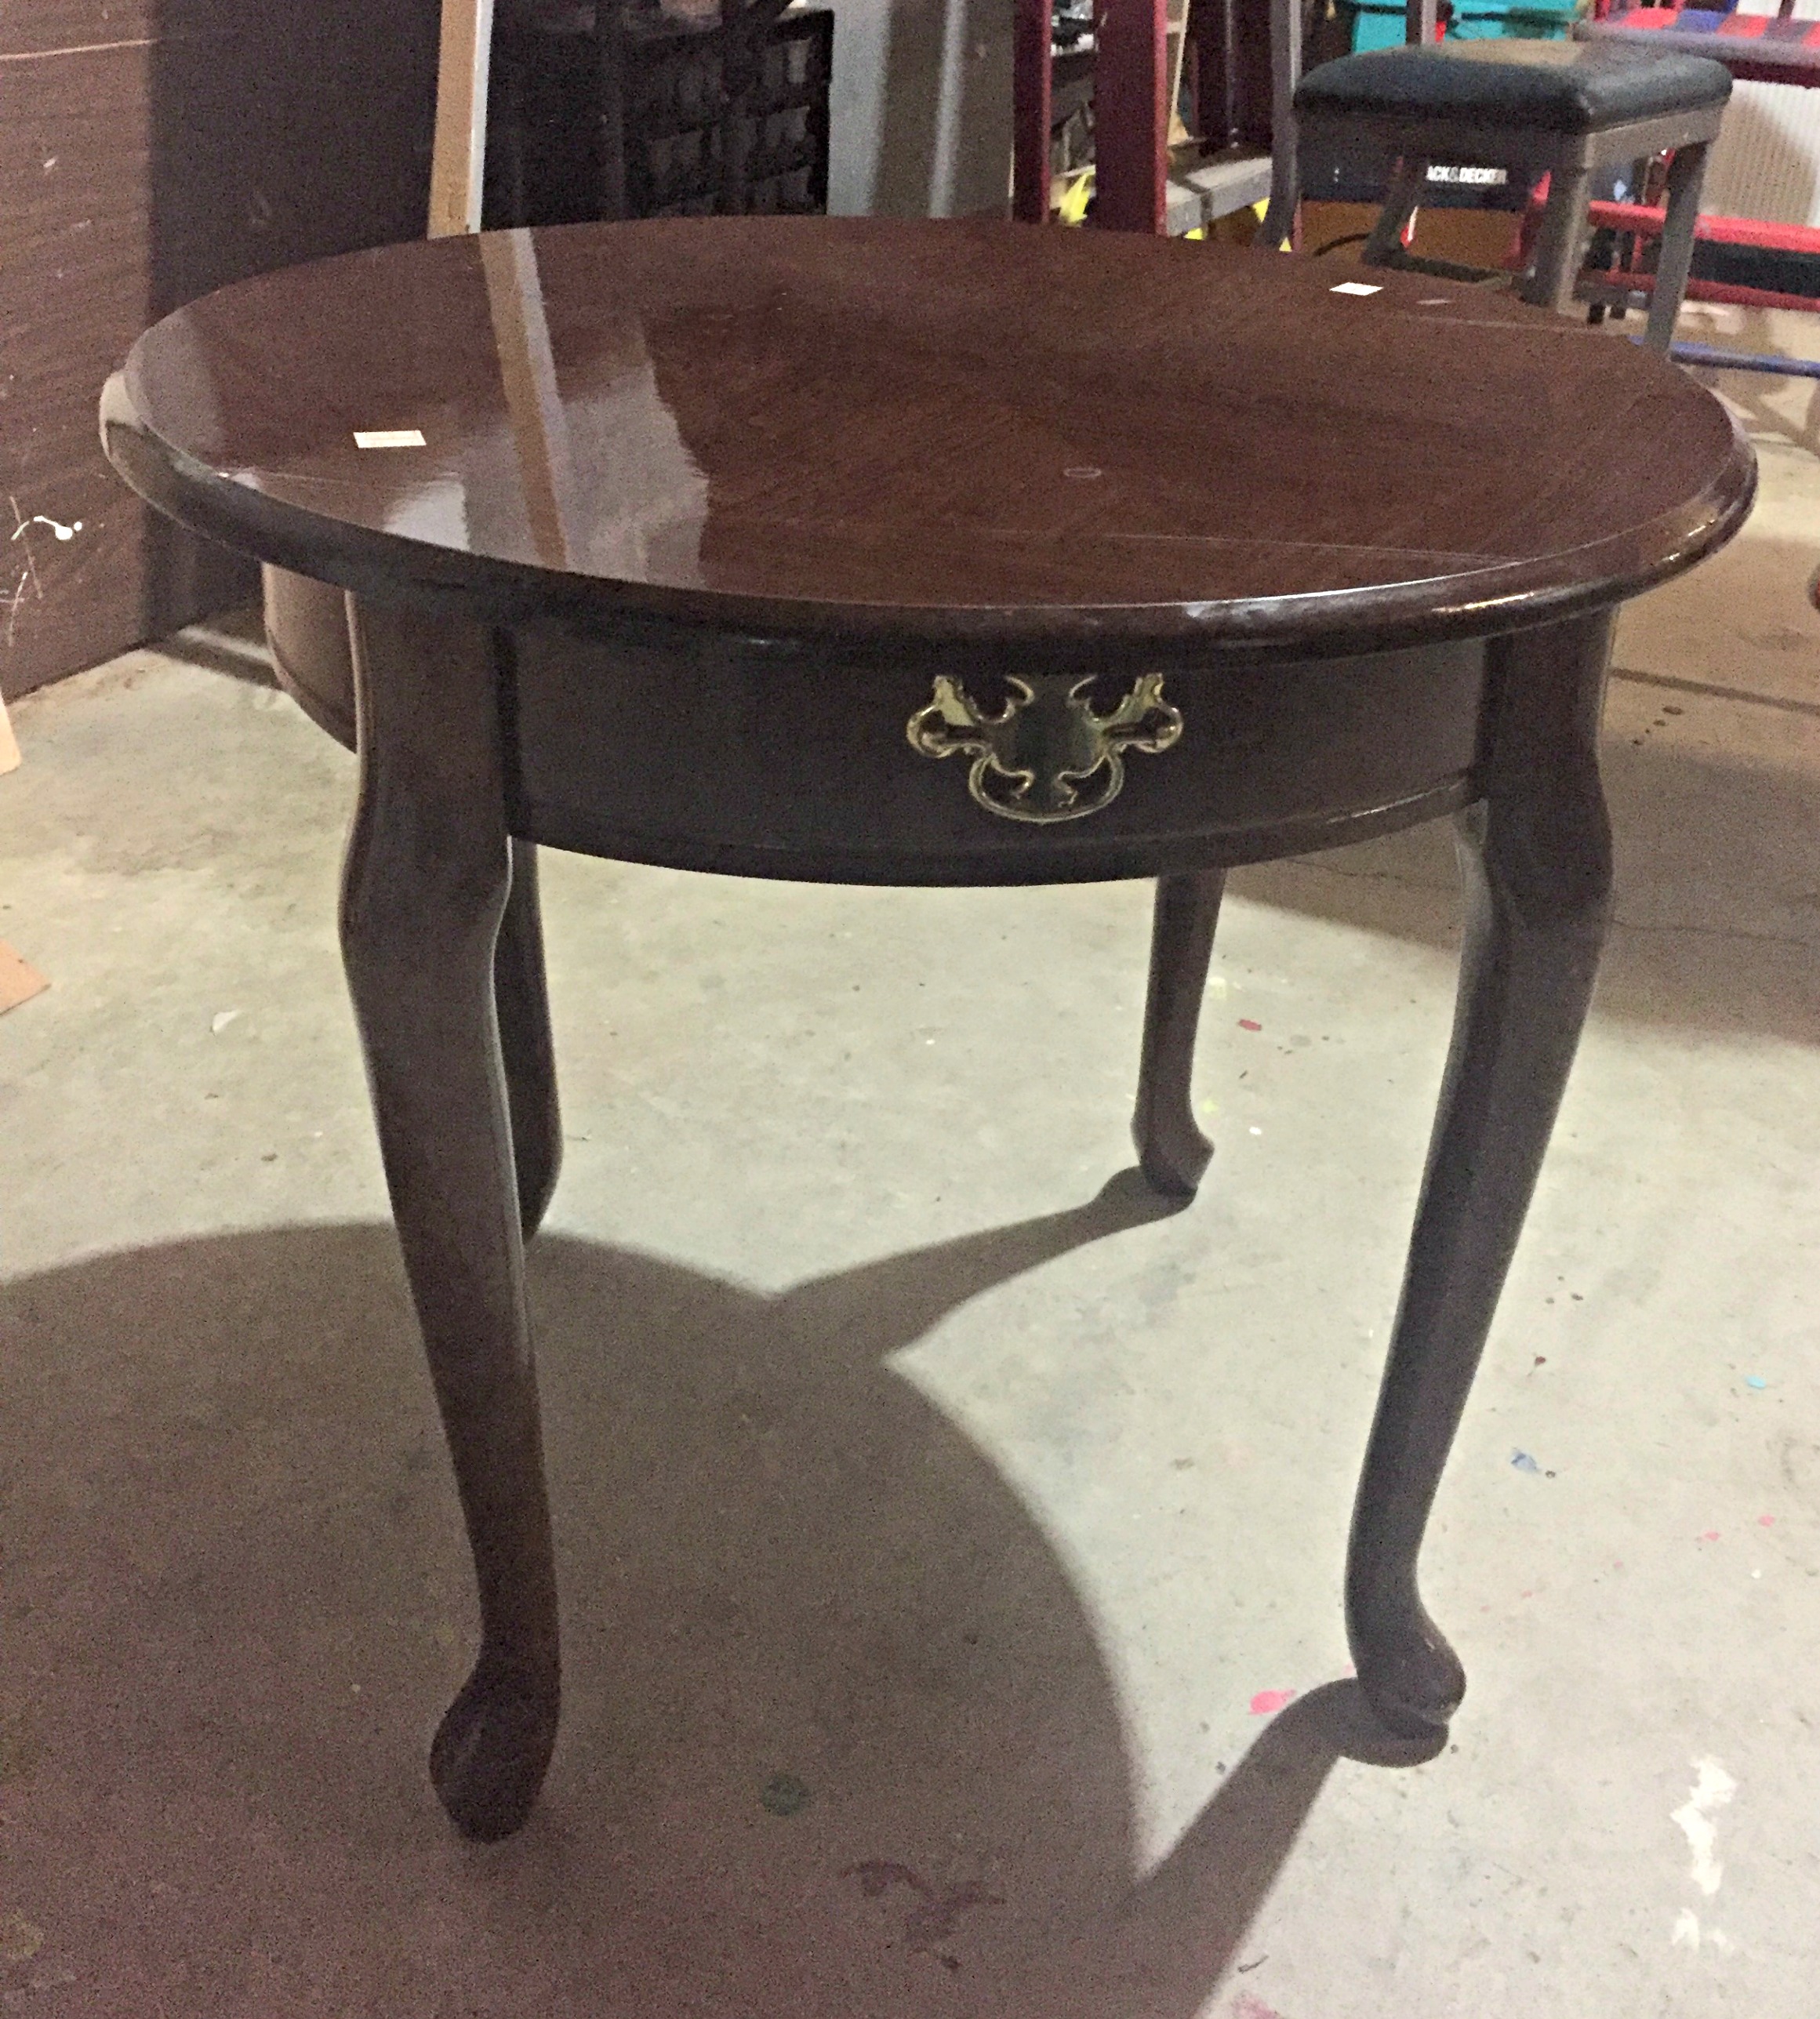 Courtney's little round table from Goodwill